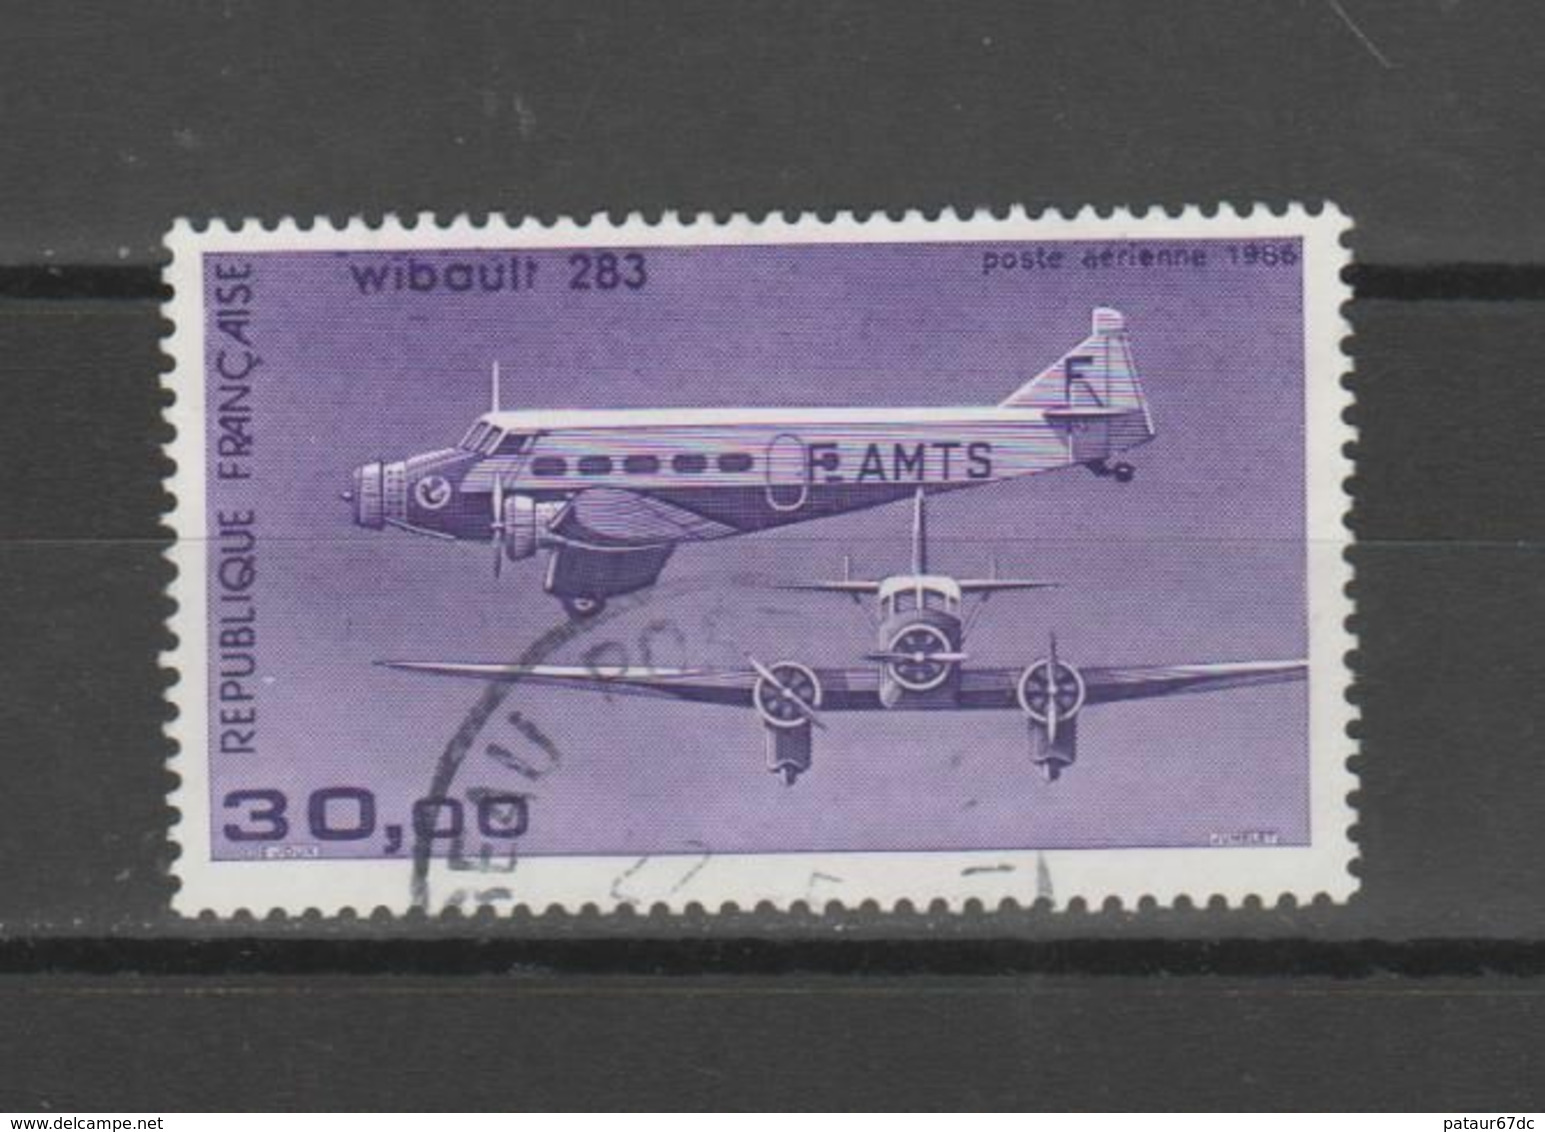 FRANCE / 1986 / Y&T PA N° 59b : Wibault 283 (papier Couché) - Choisi - Cachet Rond - 1960-.... Used